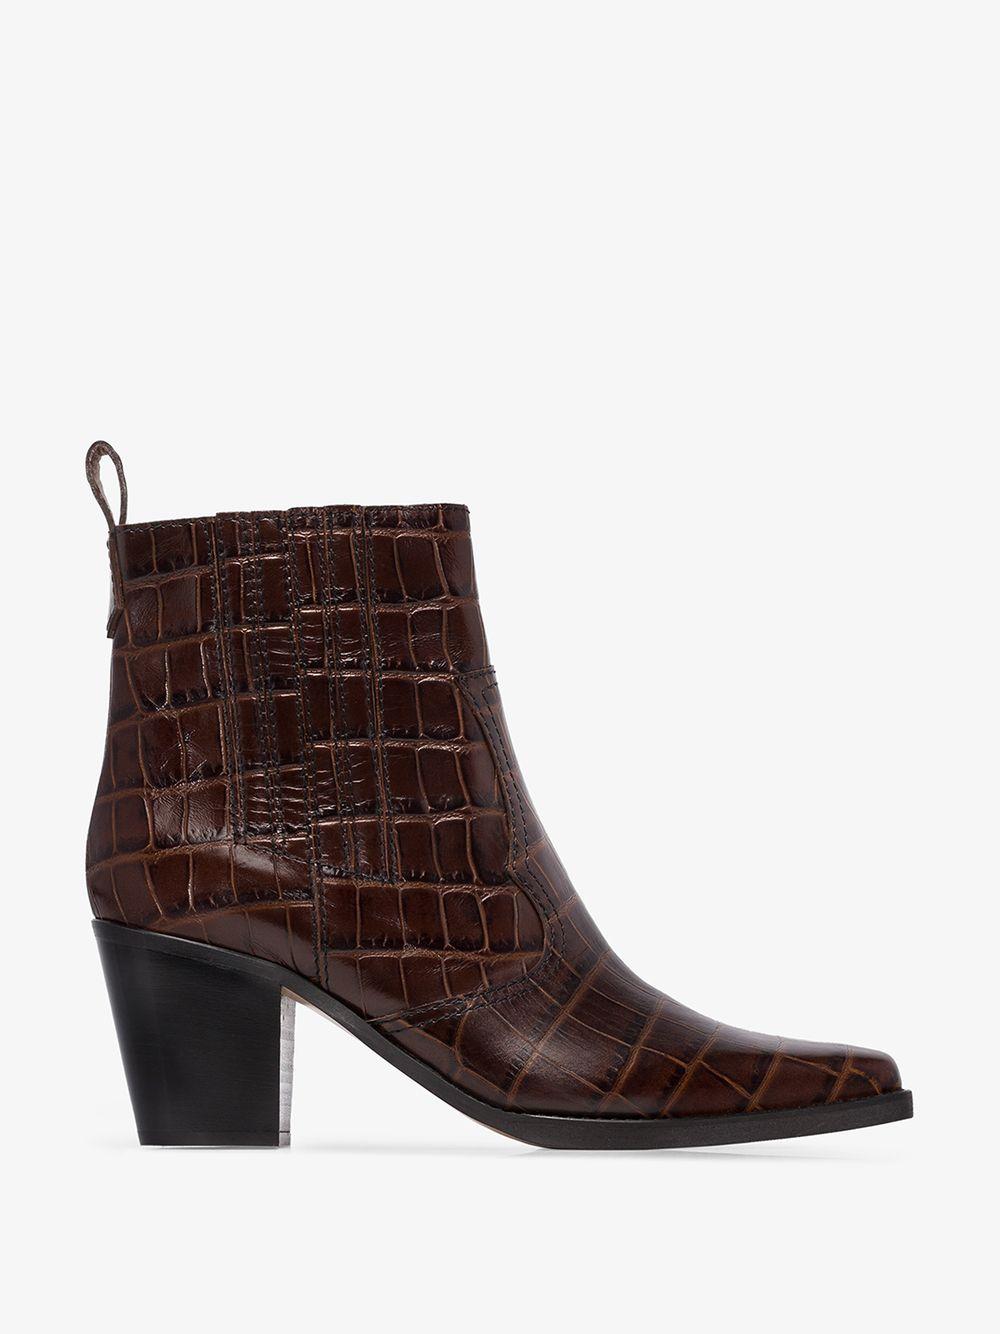 Ganni Rubber Pointed Croc Cowboy Boot in Brown - Save 8% - Lyst